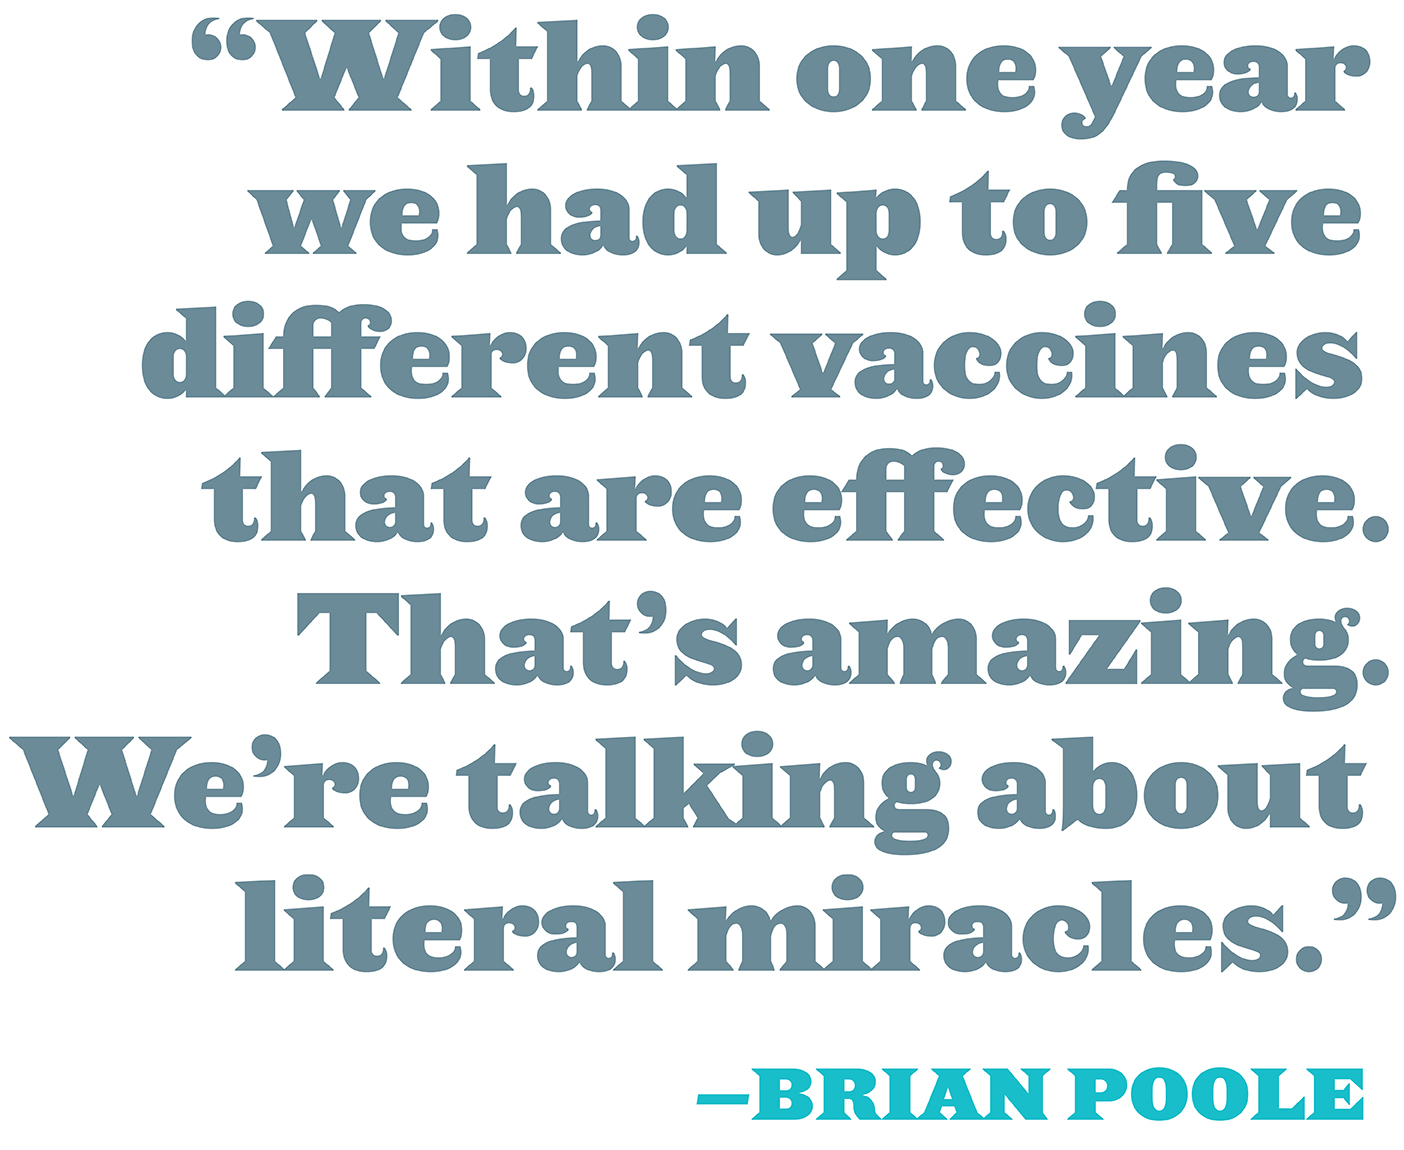 Pull quote by Brian Poole. The text reads: "Within one year we had up to five different vaccines that are effective. That's amazing. We're talking about literal miracles."